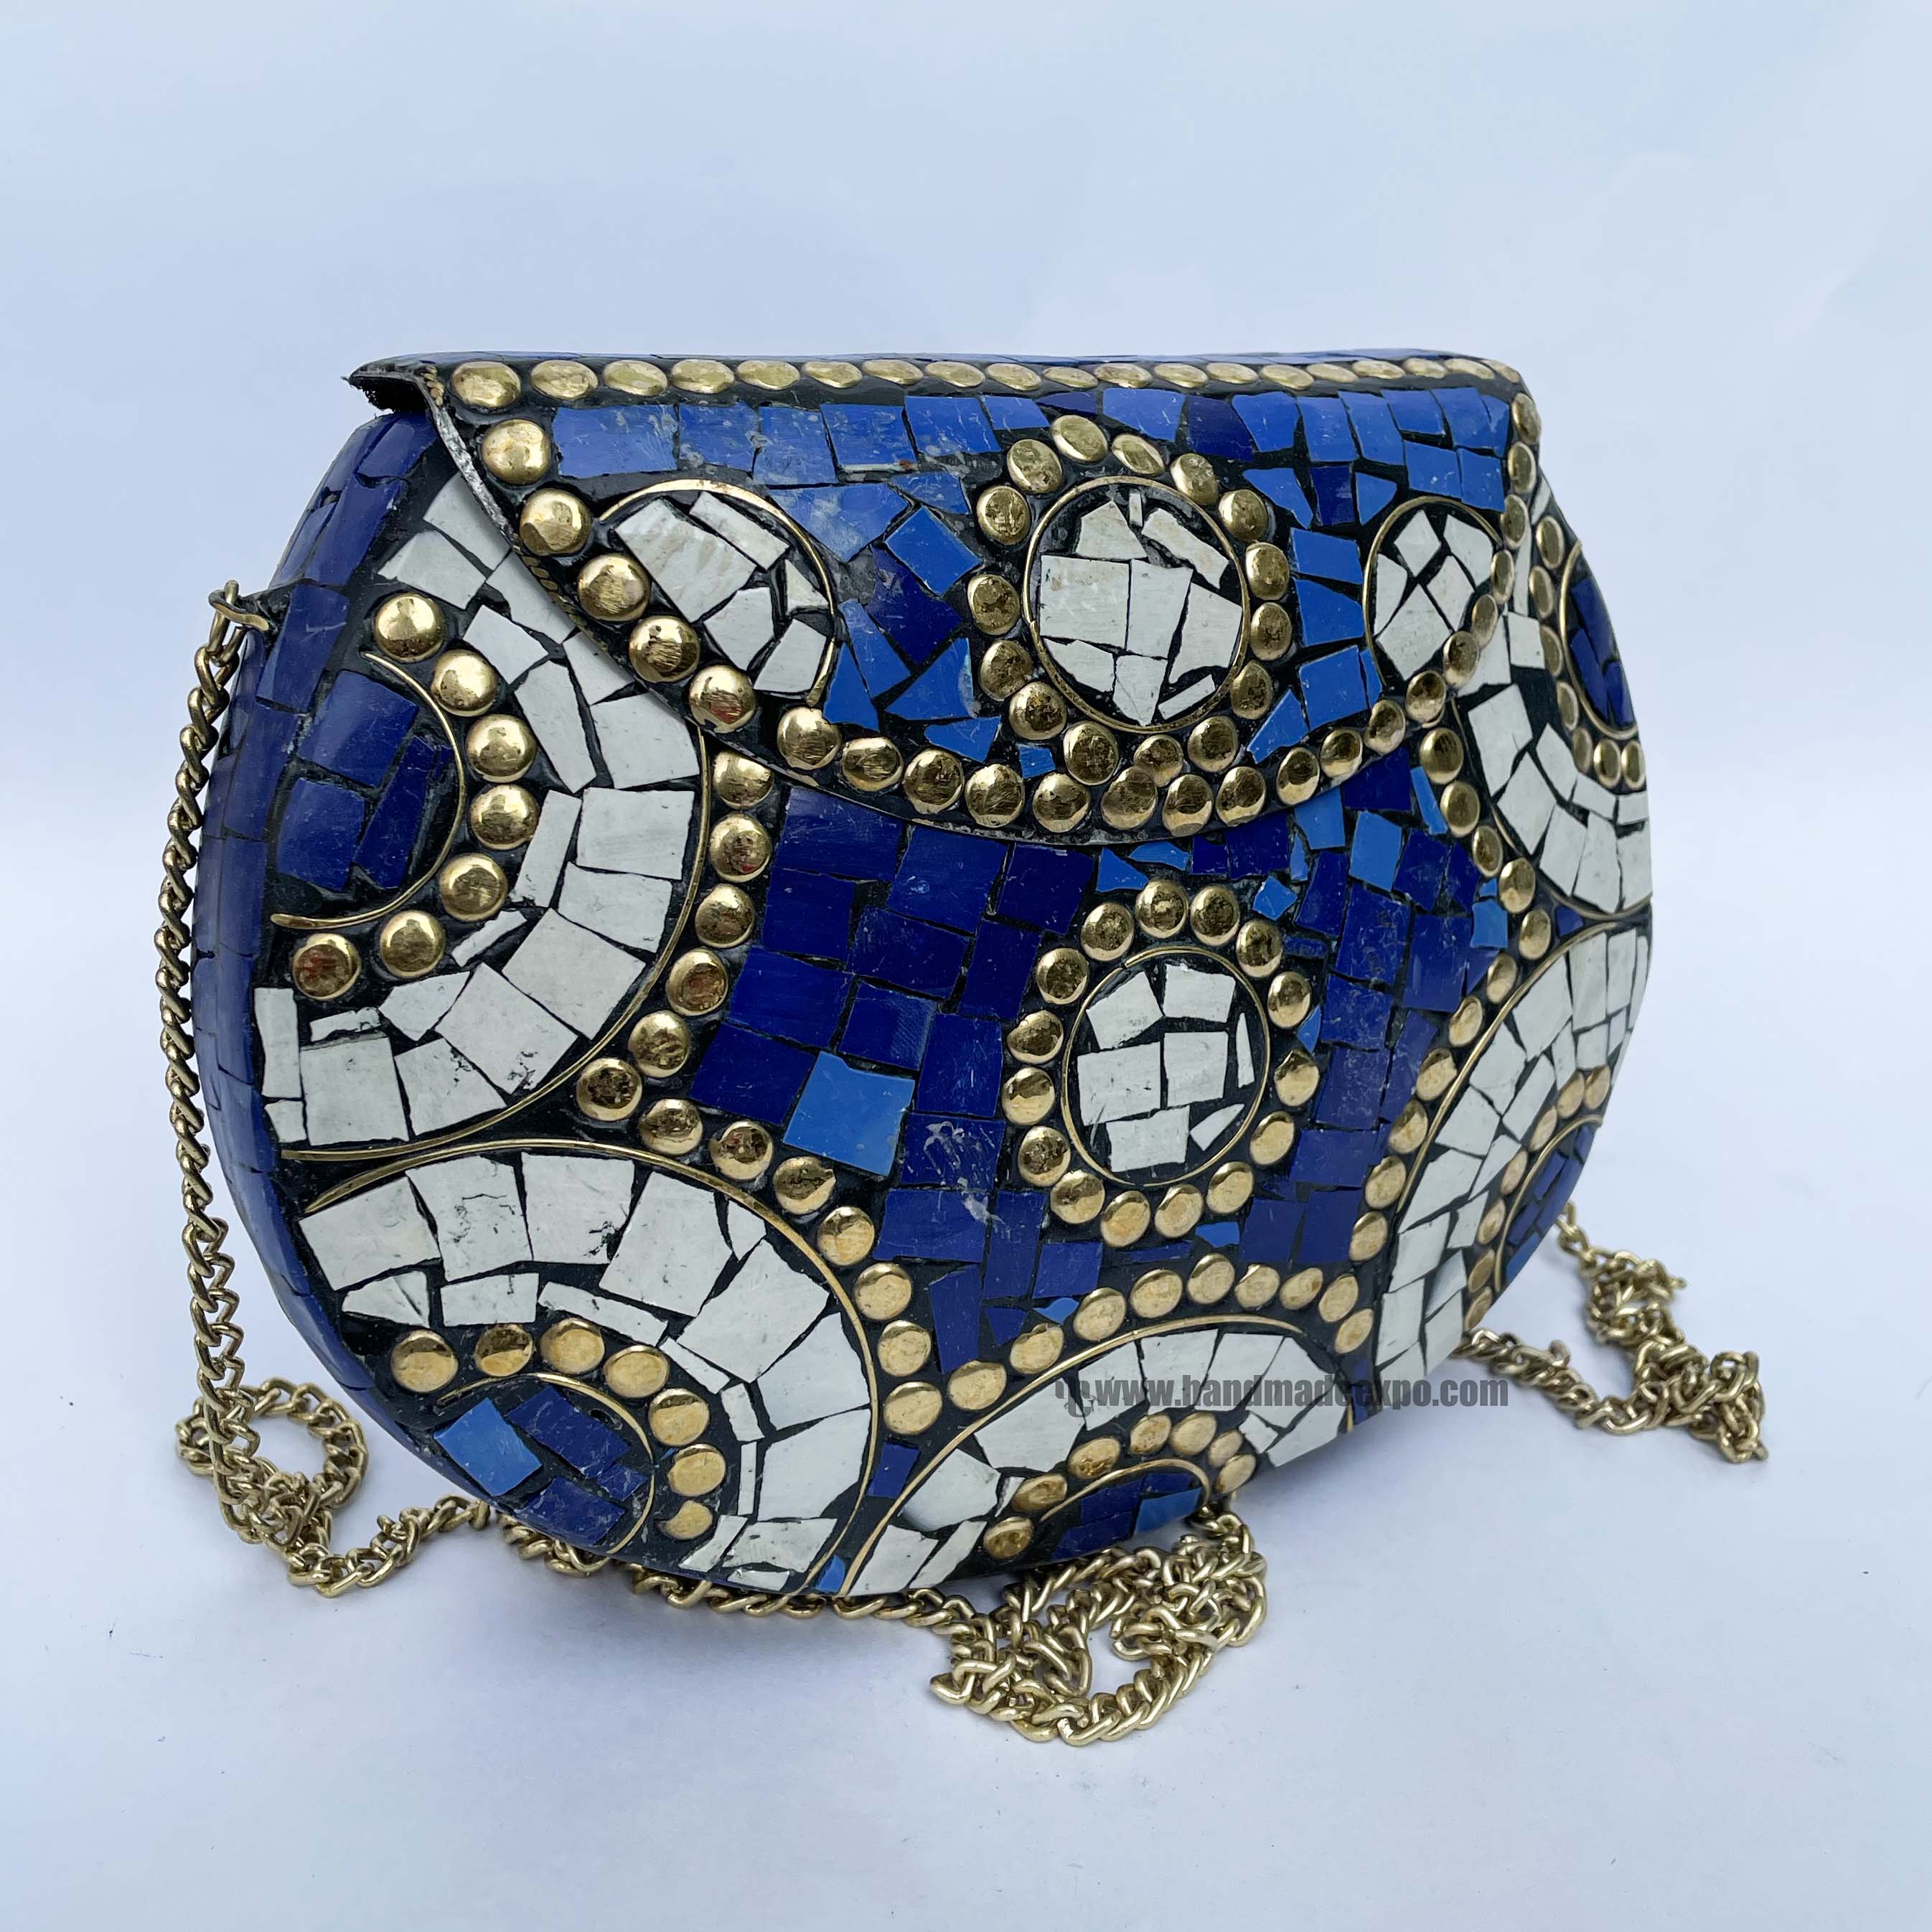 Nepali Handmade Big Ladies Bag With stone Setting, metal, blue And White Color